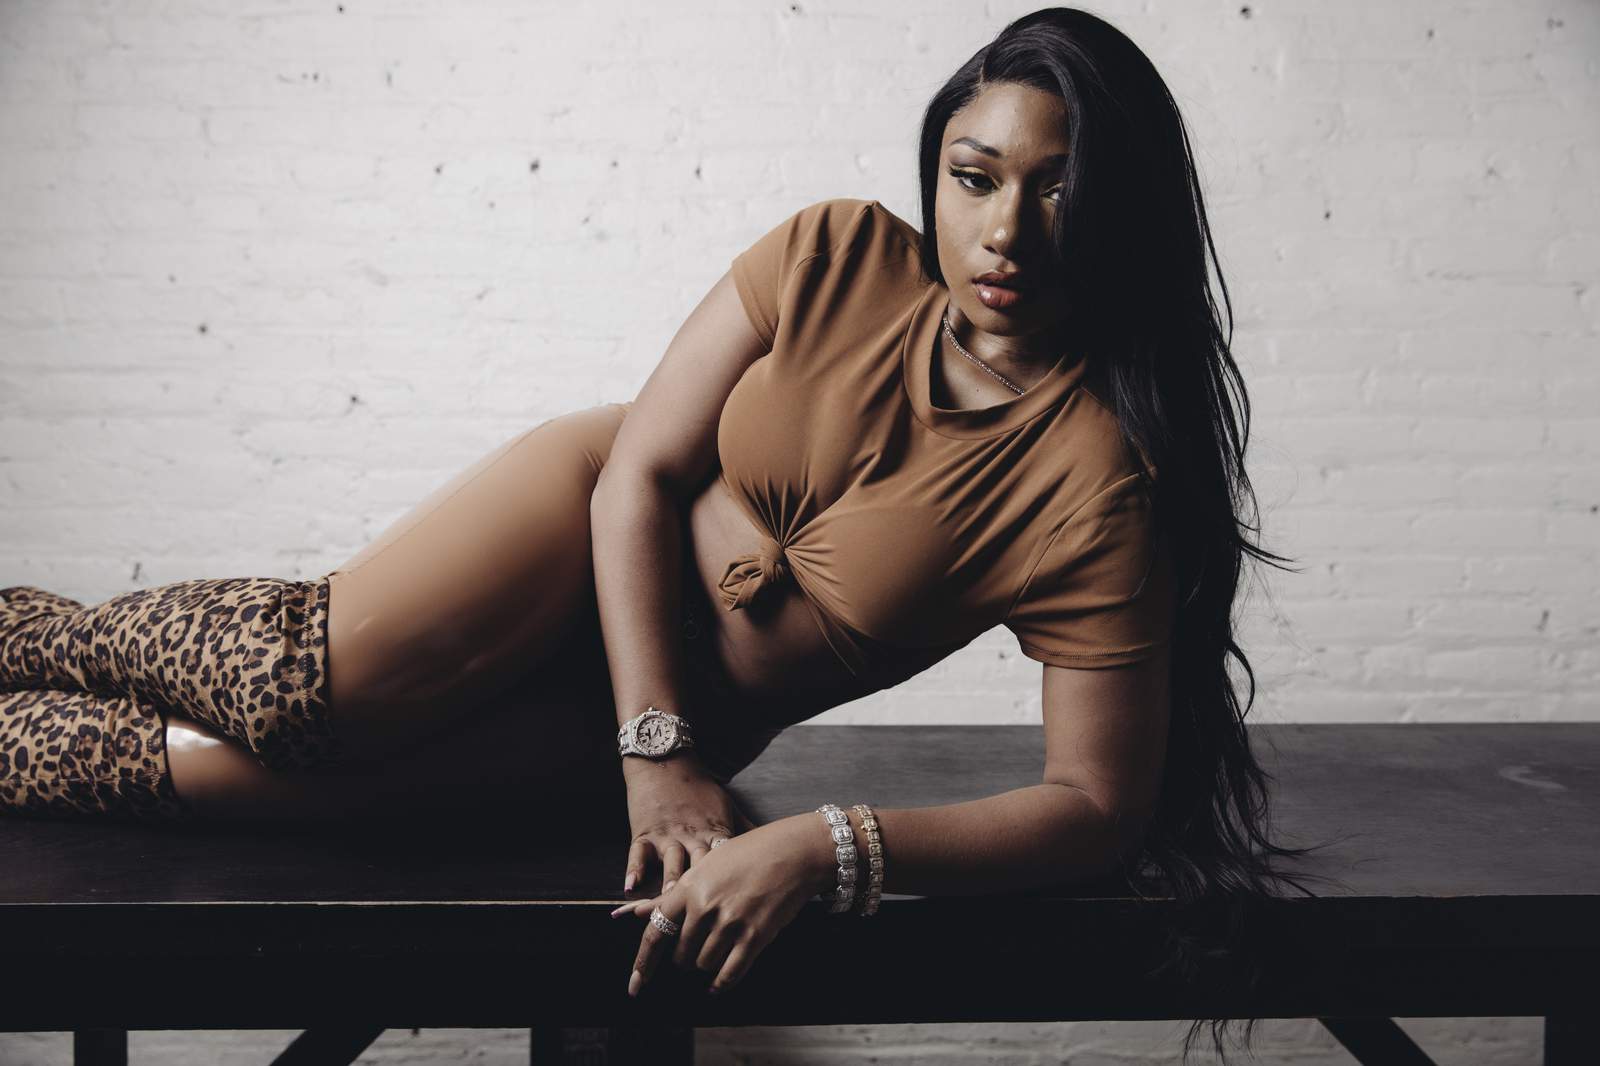 Houston rapper Megan Thee Stallion named one of the most influential people of 2020